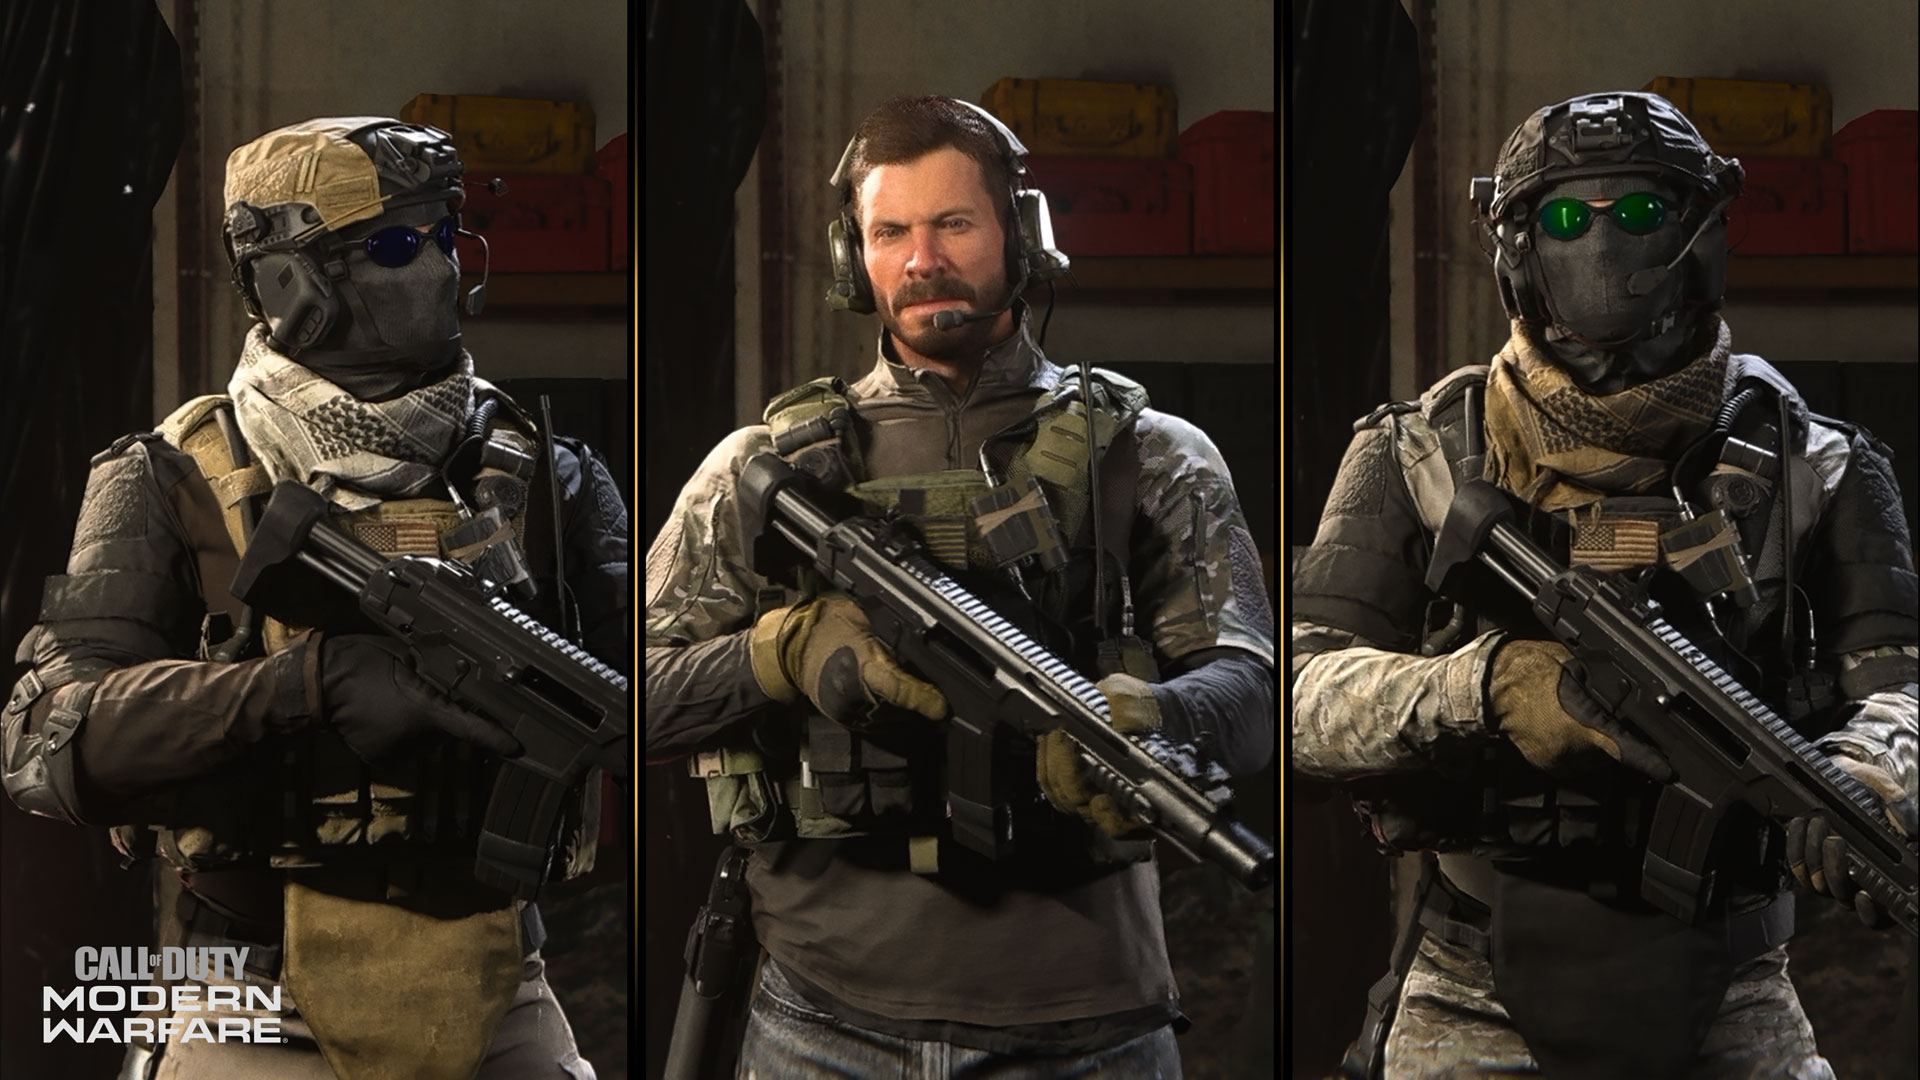 Ronin Bolsters the Coalition Forces of Call of Duty®: Modern Warfare® as a One-Man Army - Image 2